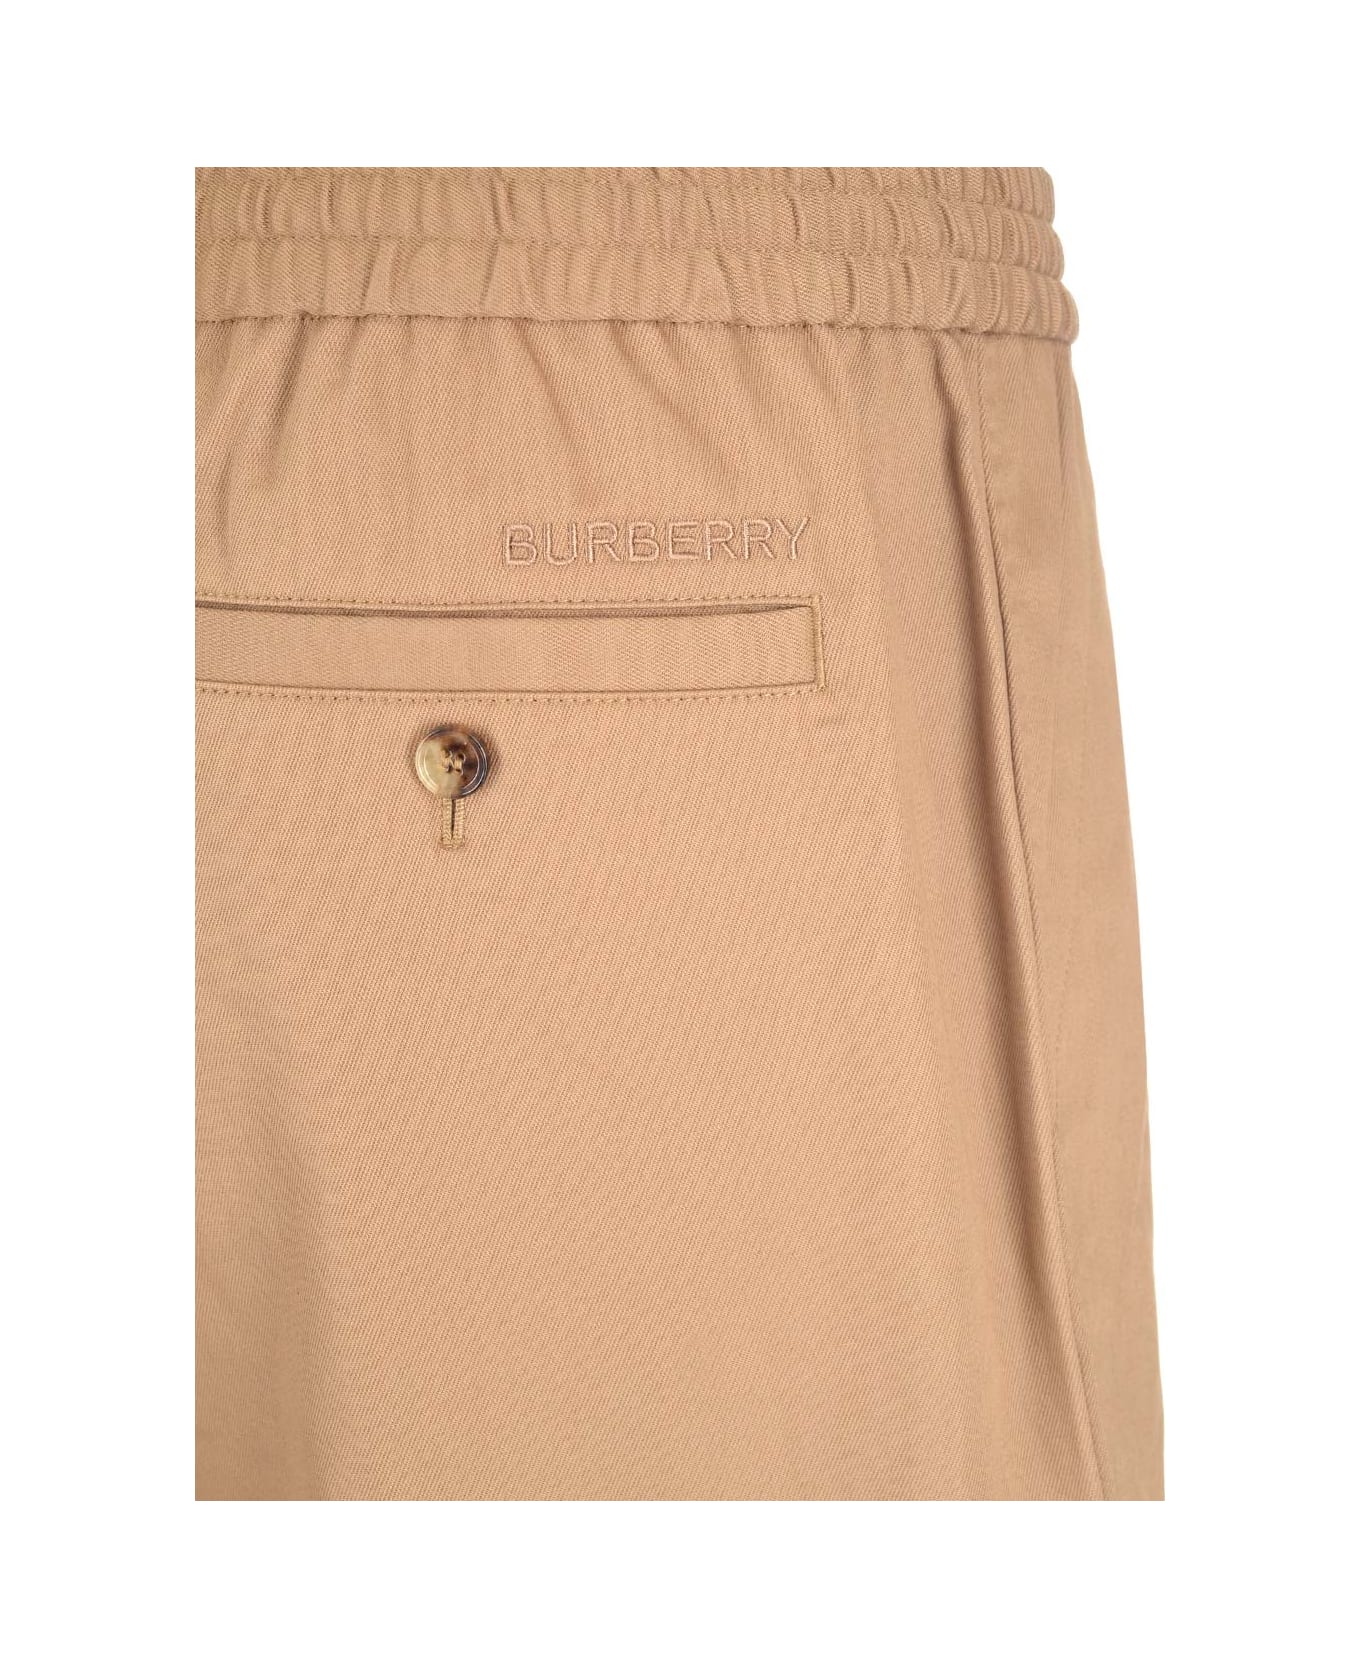 Burberry Camel Cotton Cargo Trousers - Brown ボトムス